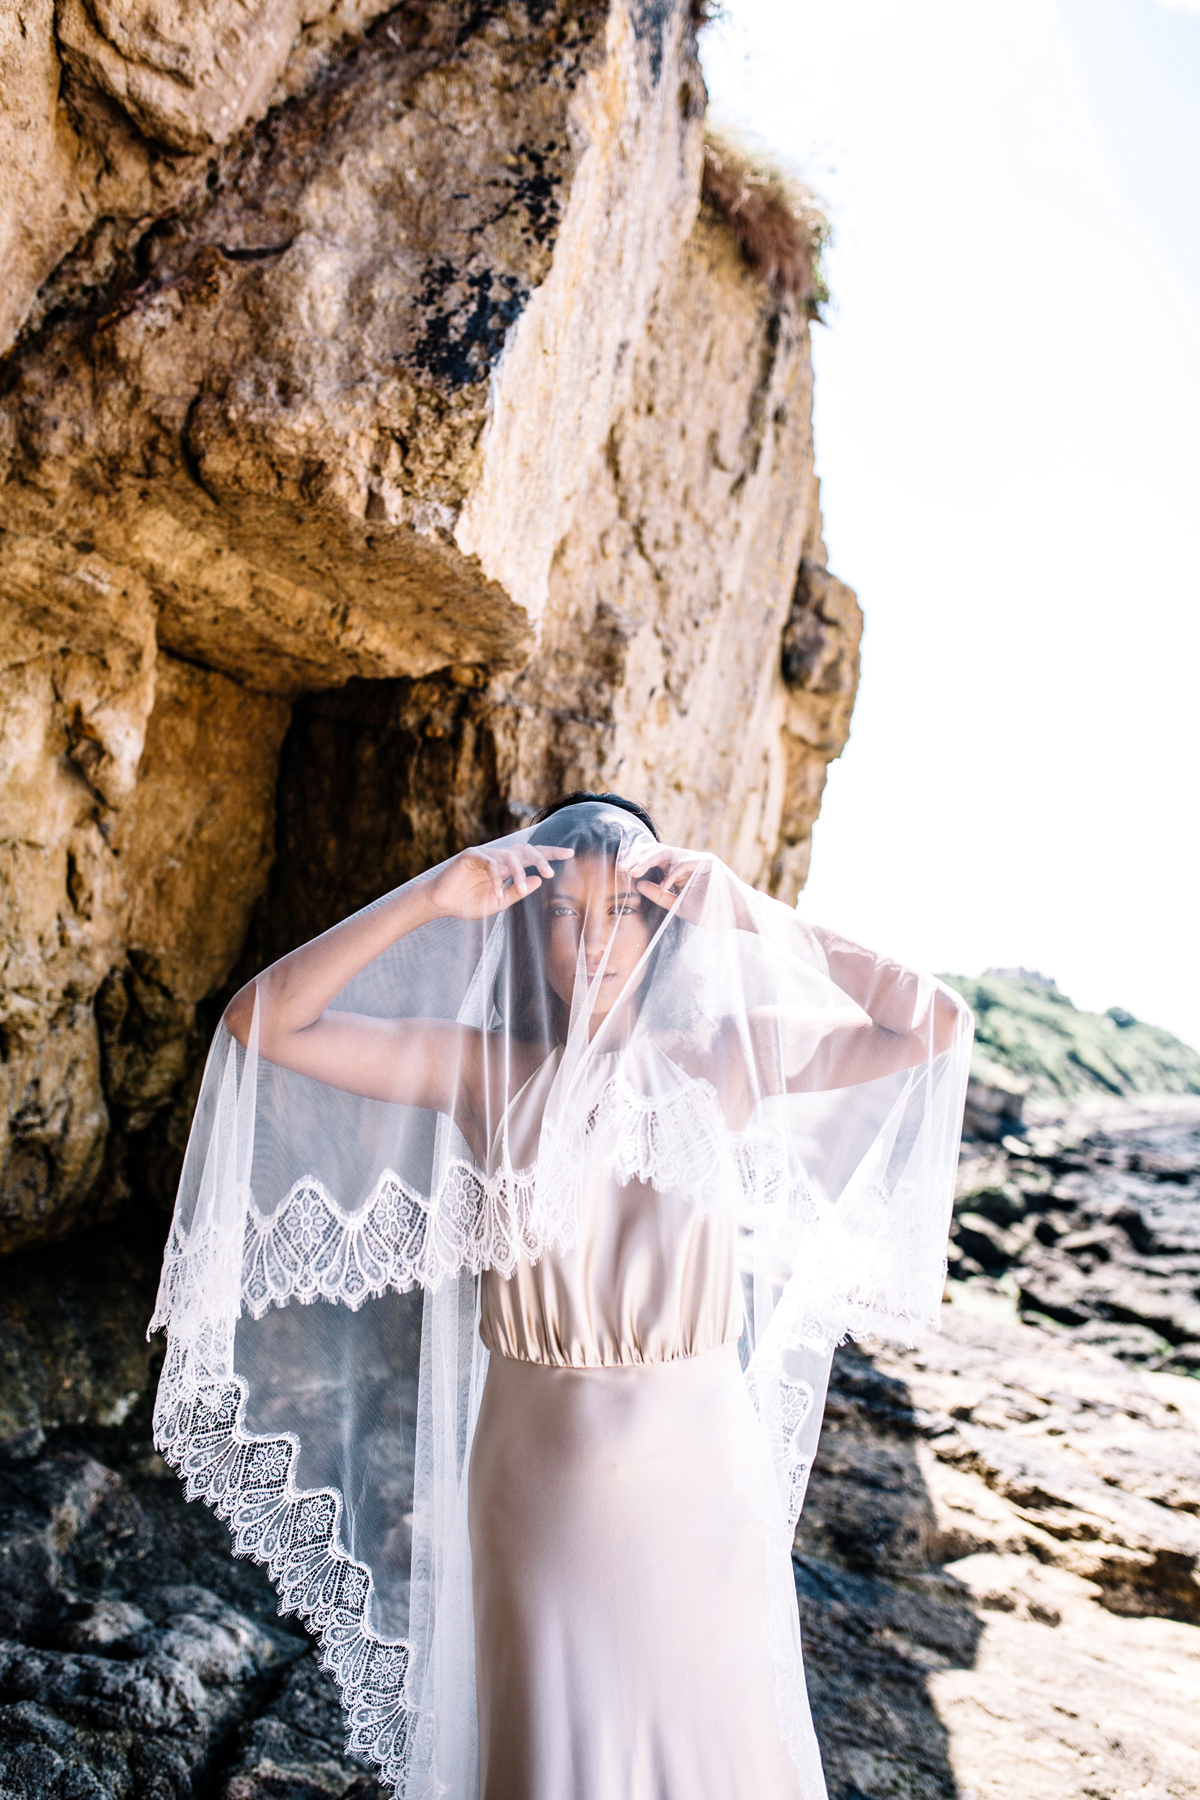 Kate Beaumont bridal gowns and veils. Images by Megan Gisborne.